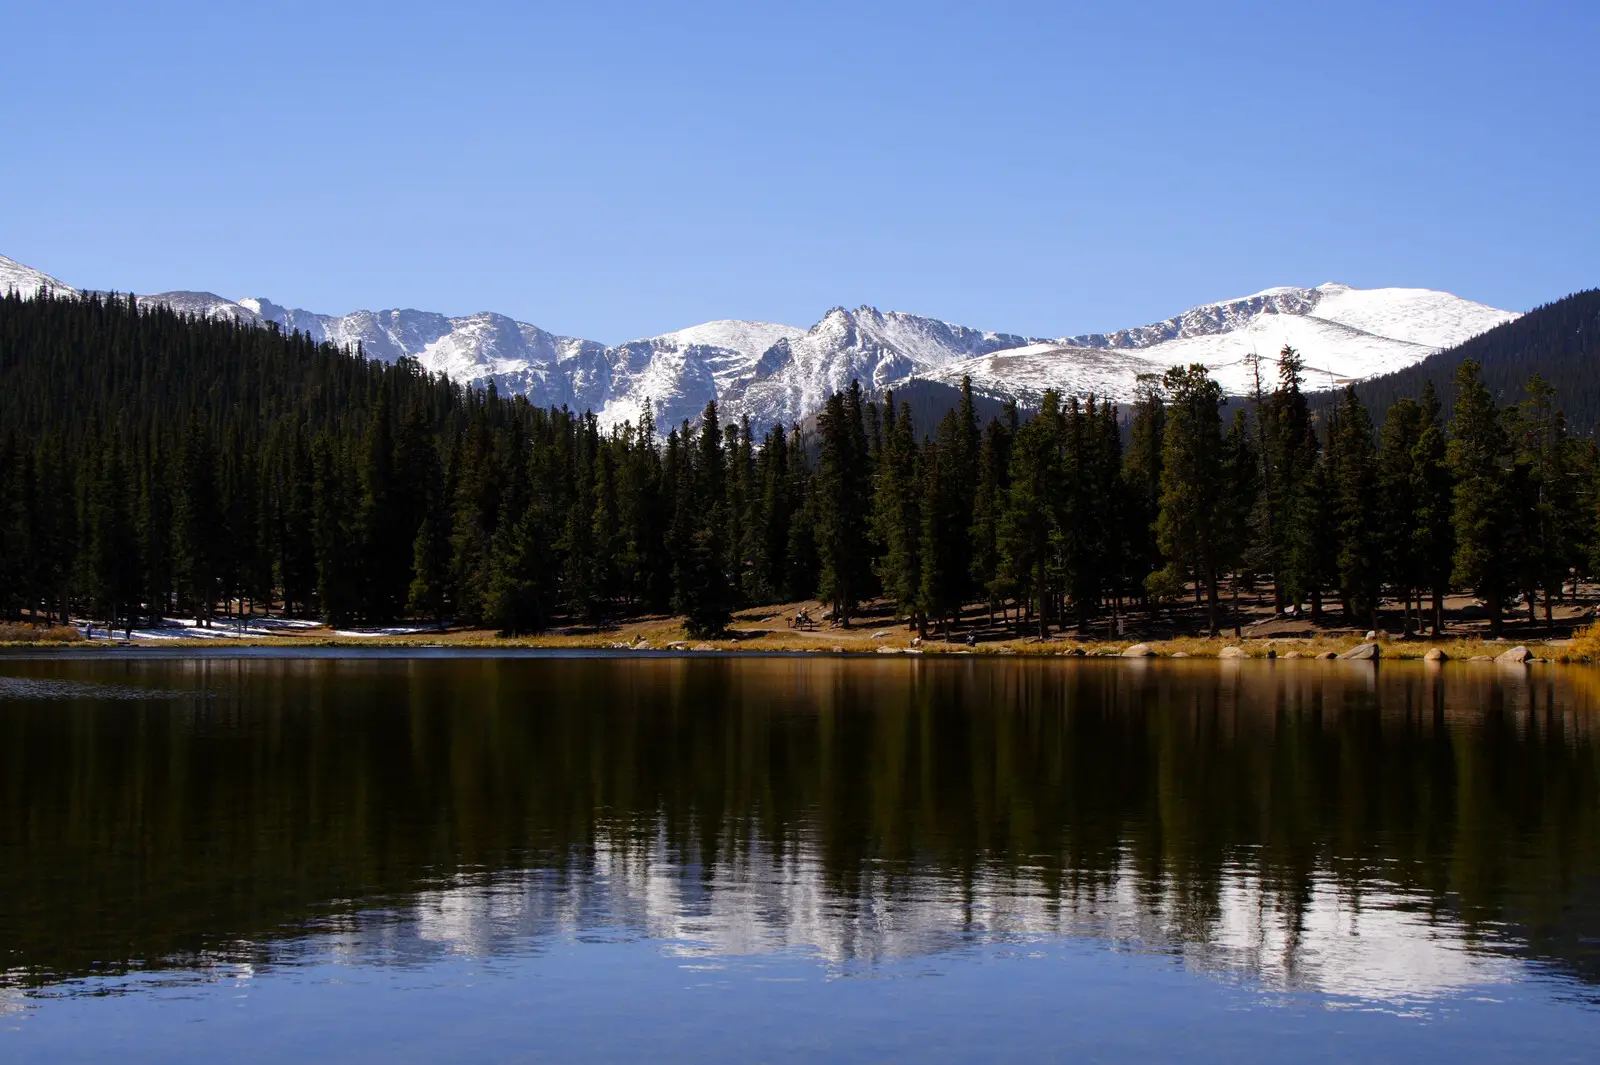 Echo Lake with mountains in the far background and evergreens framing a lake that reflects the trees, mountains and blue sky